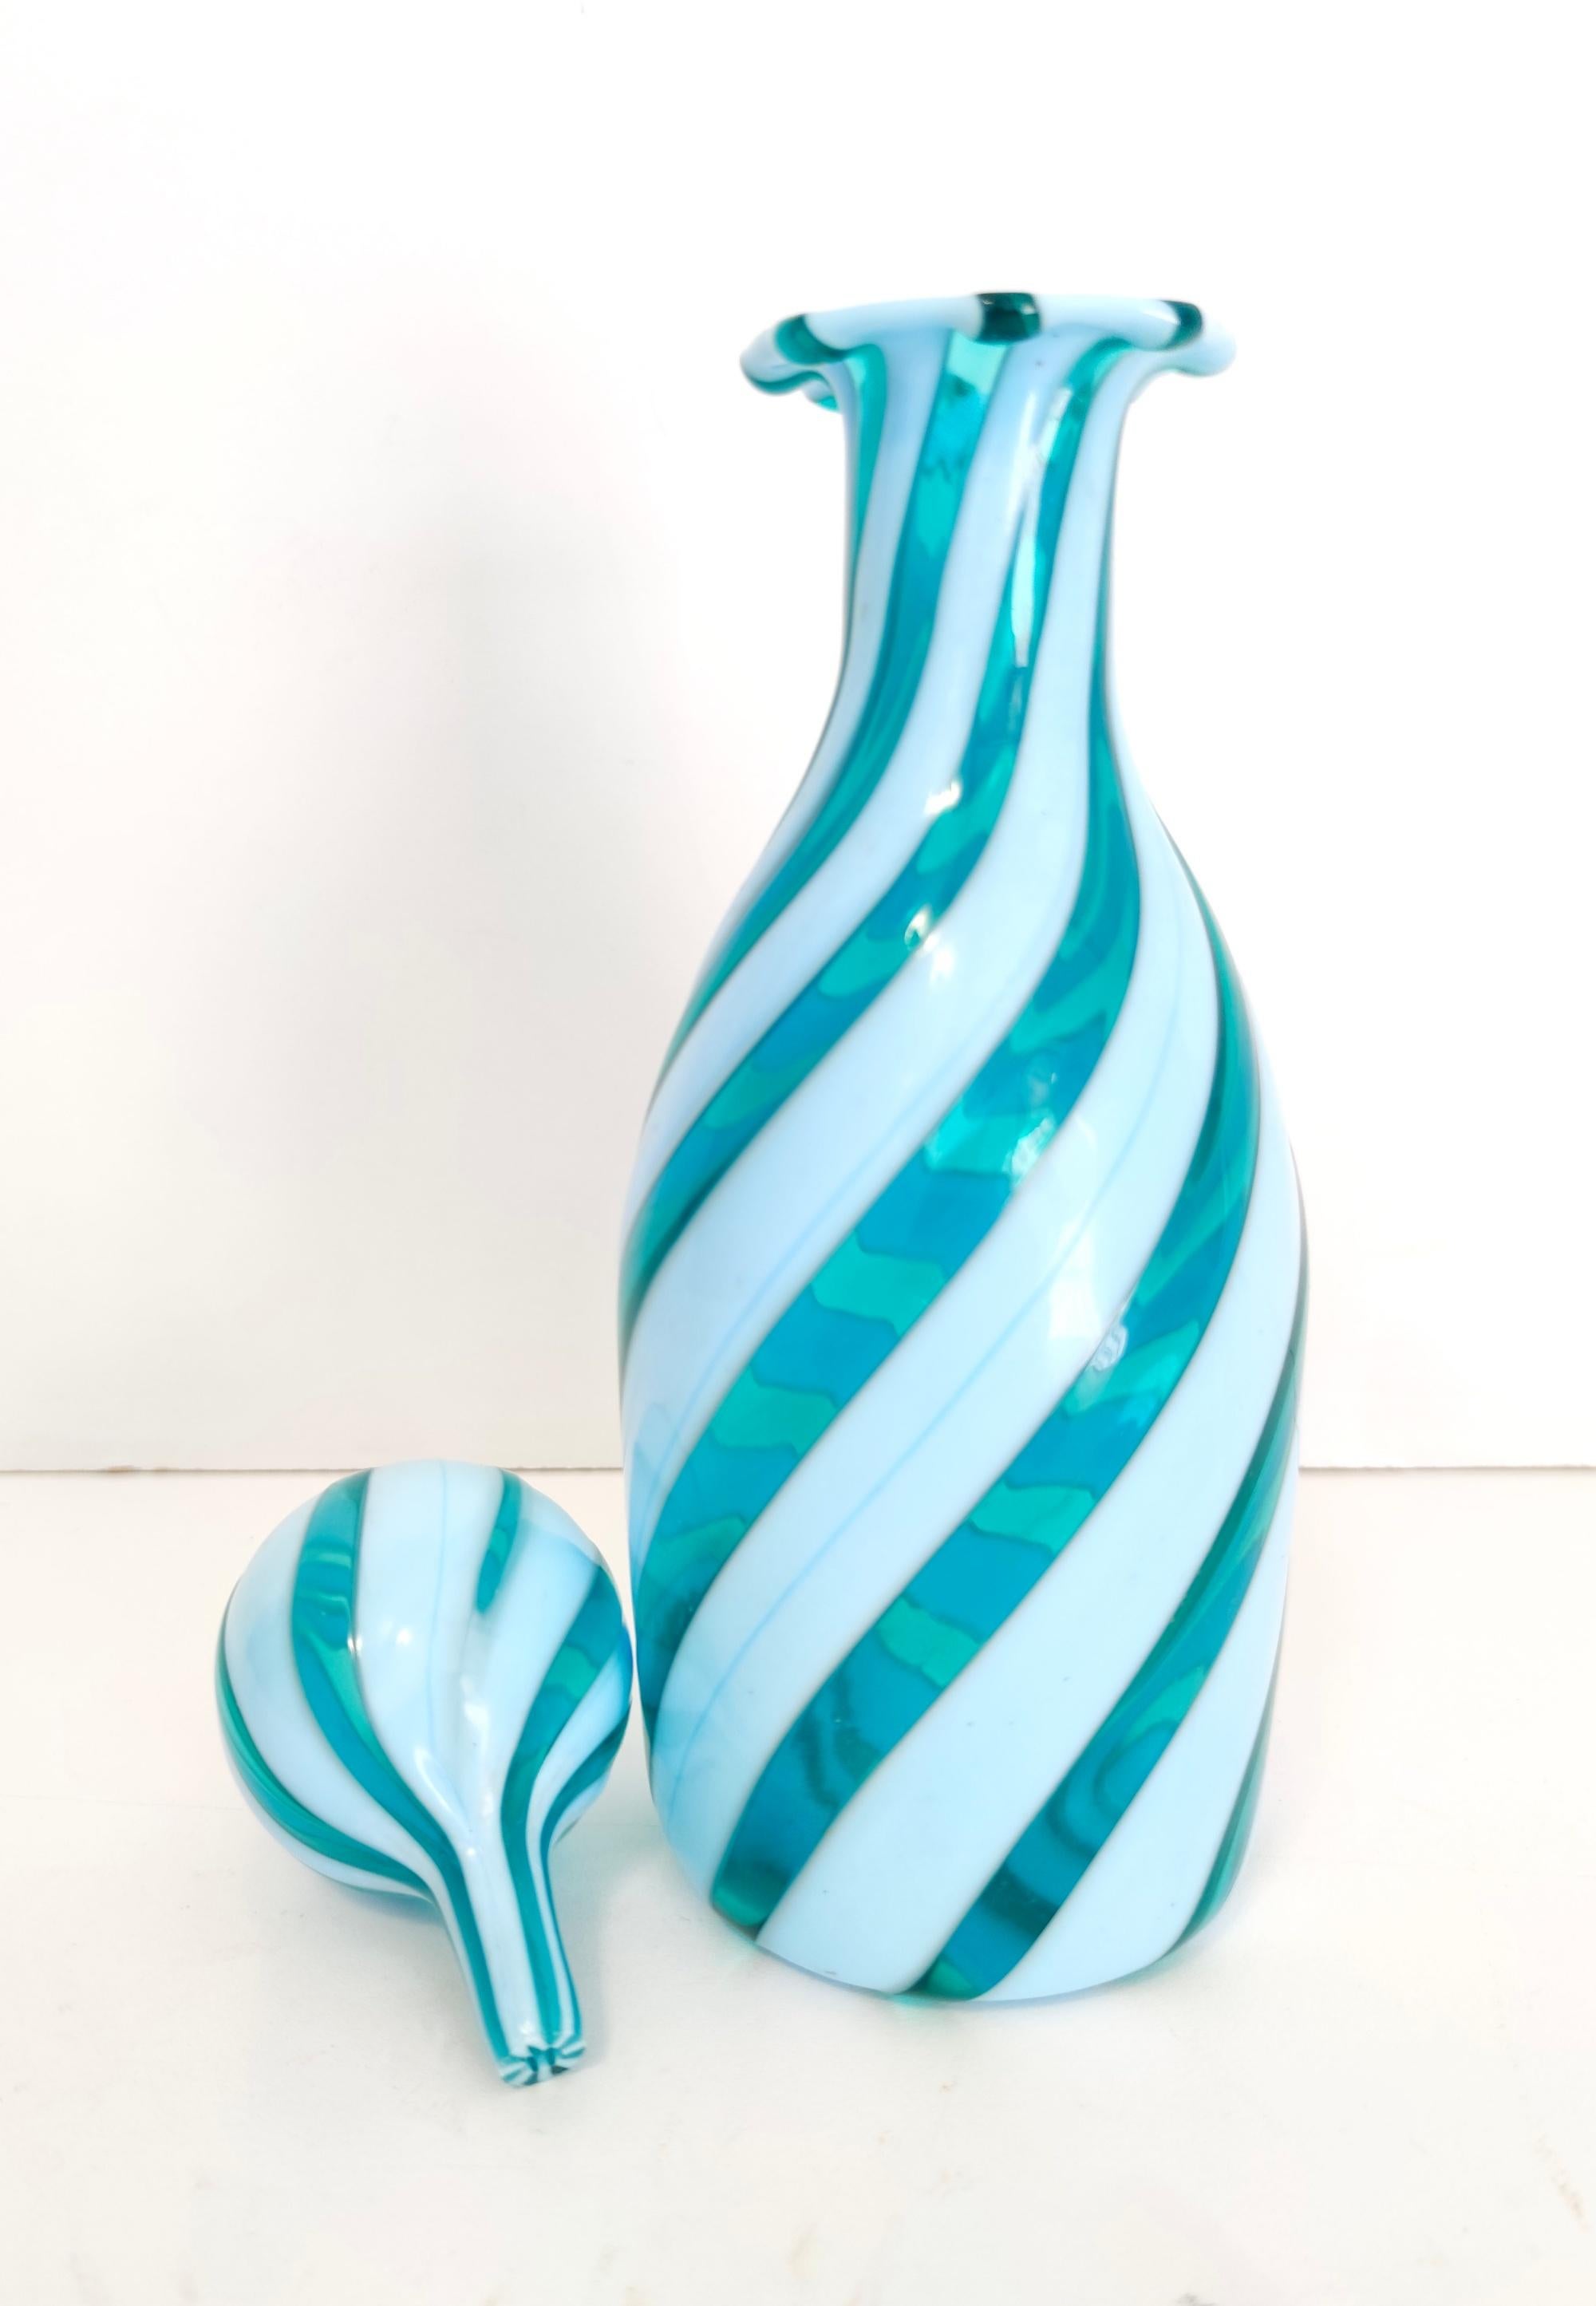 Mid-20th Century Murano Glass Decanter Ascribable to Toso with Teal and White Canes, Italy